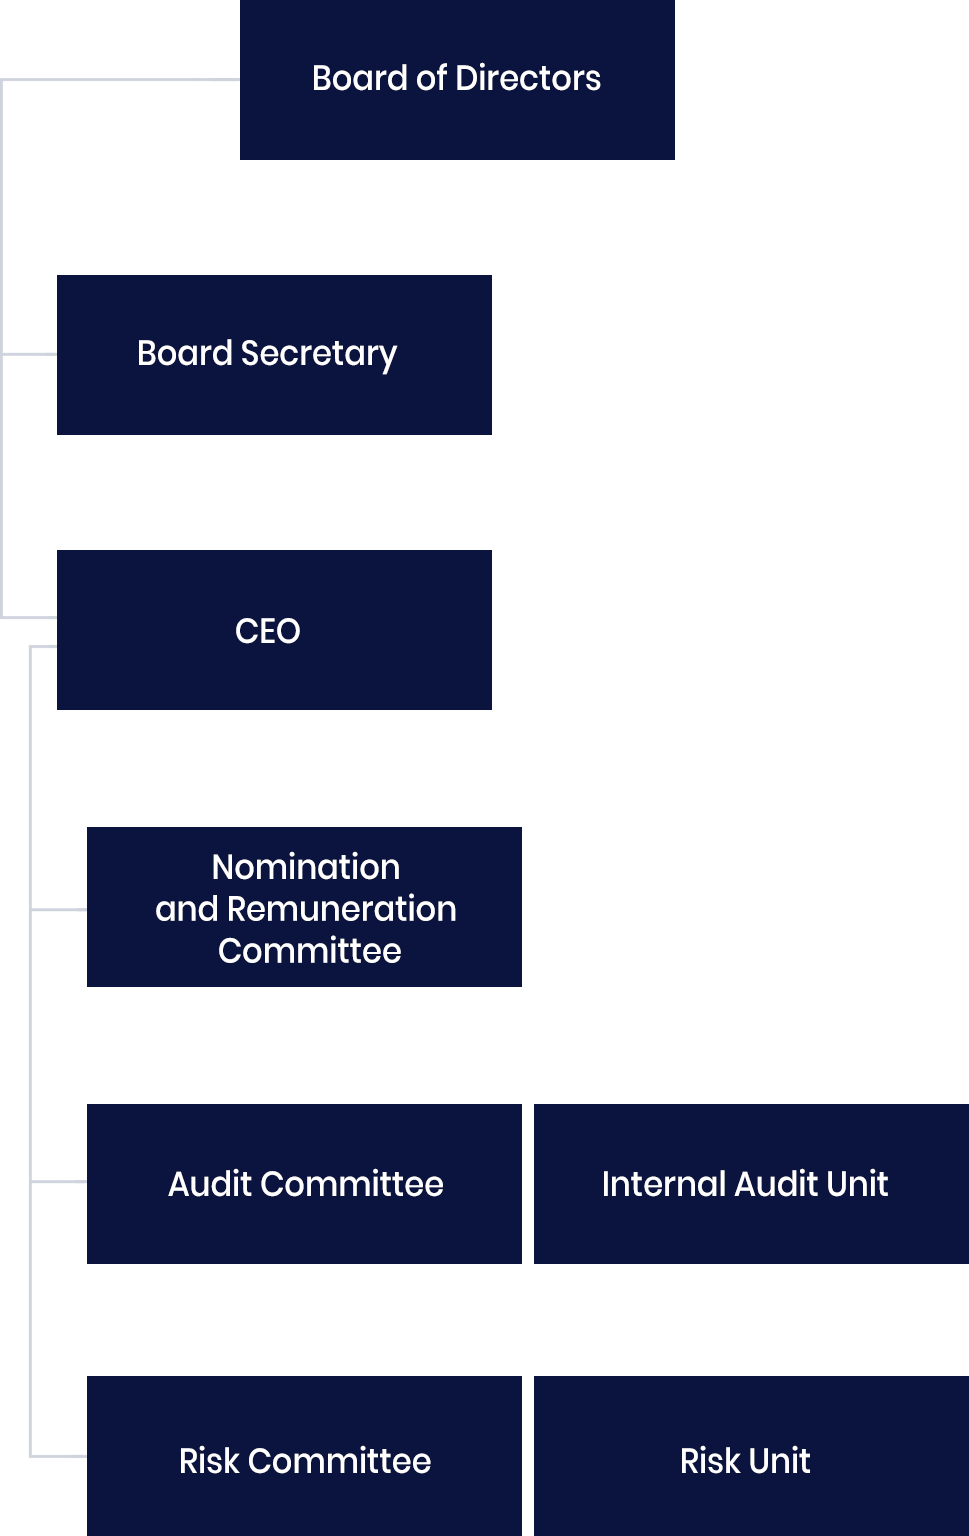 The Board of Directors consists of CEO, Board Secretary and Board Committees.